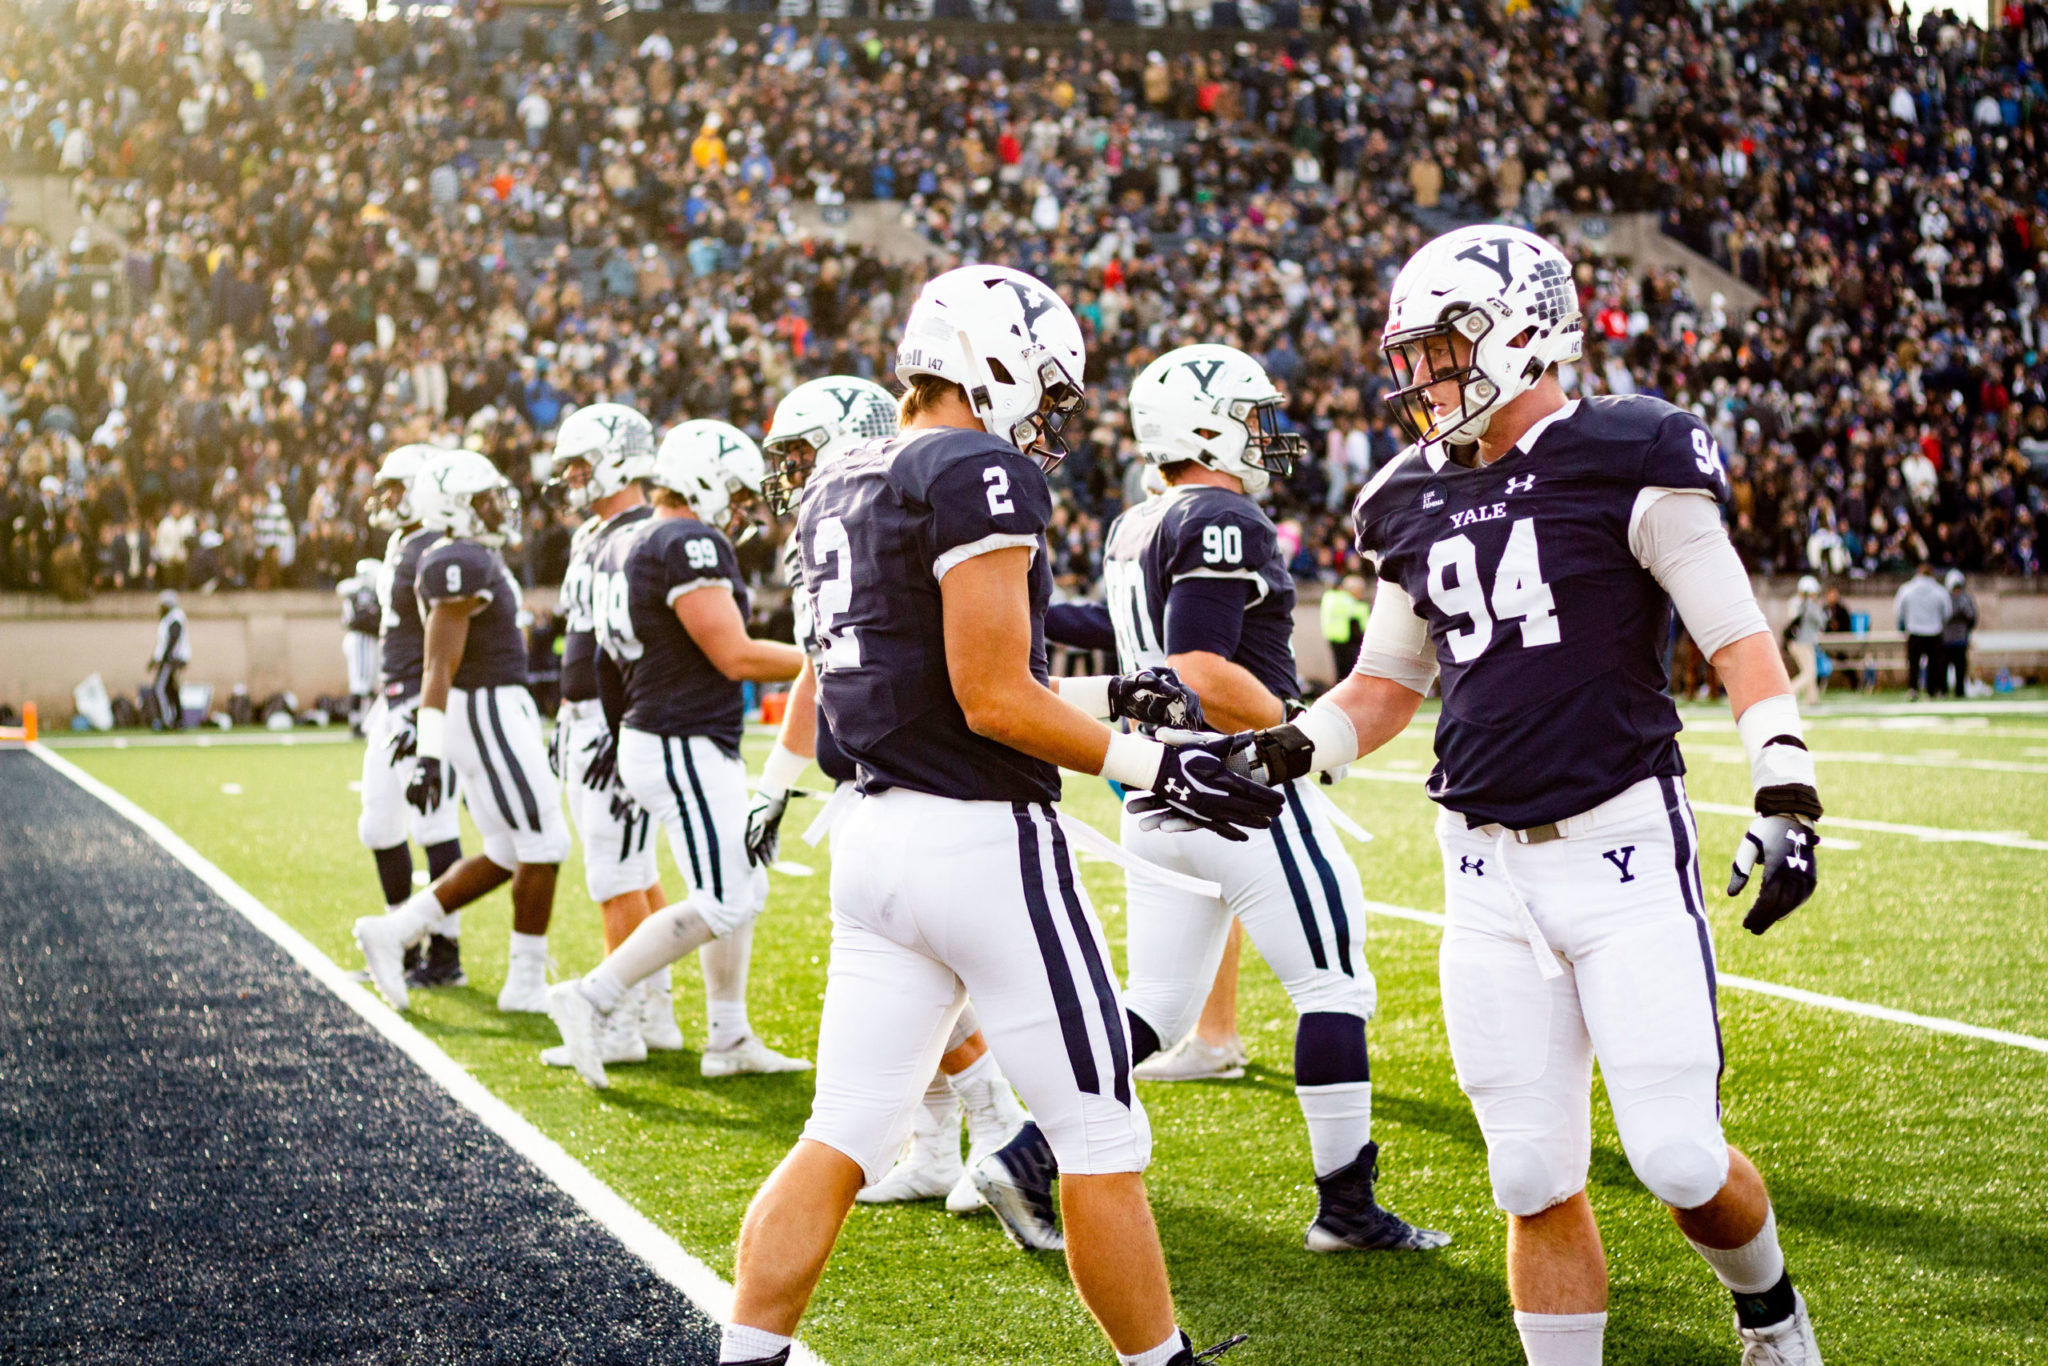 FOOTBALL: Yale set to host The Game in fall 2021 - Yale Daily News